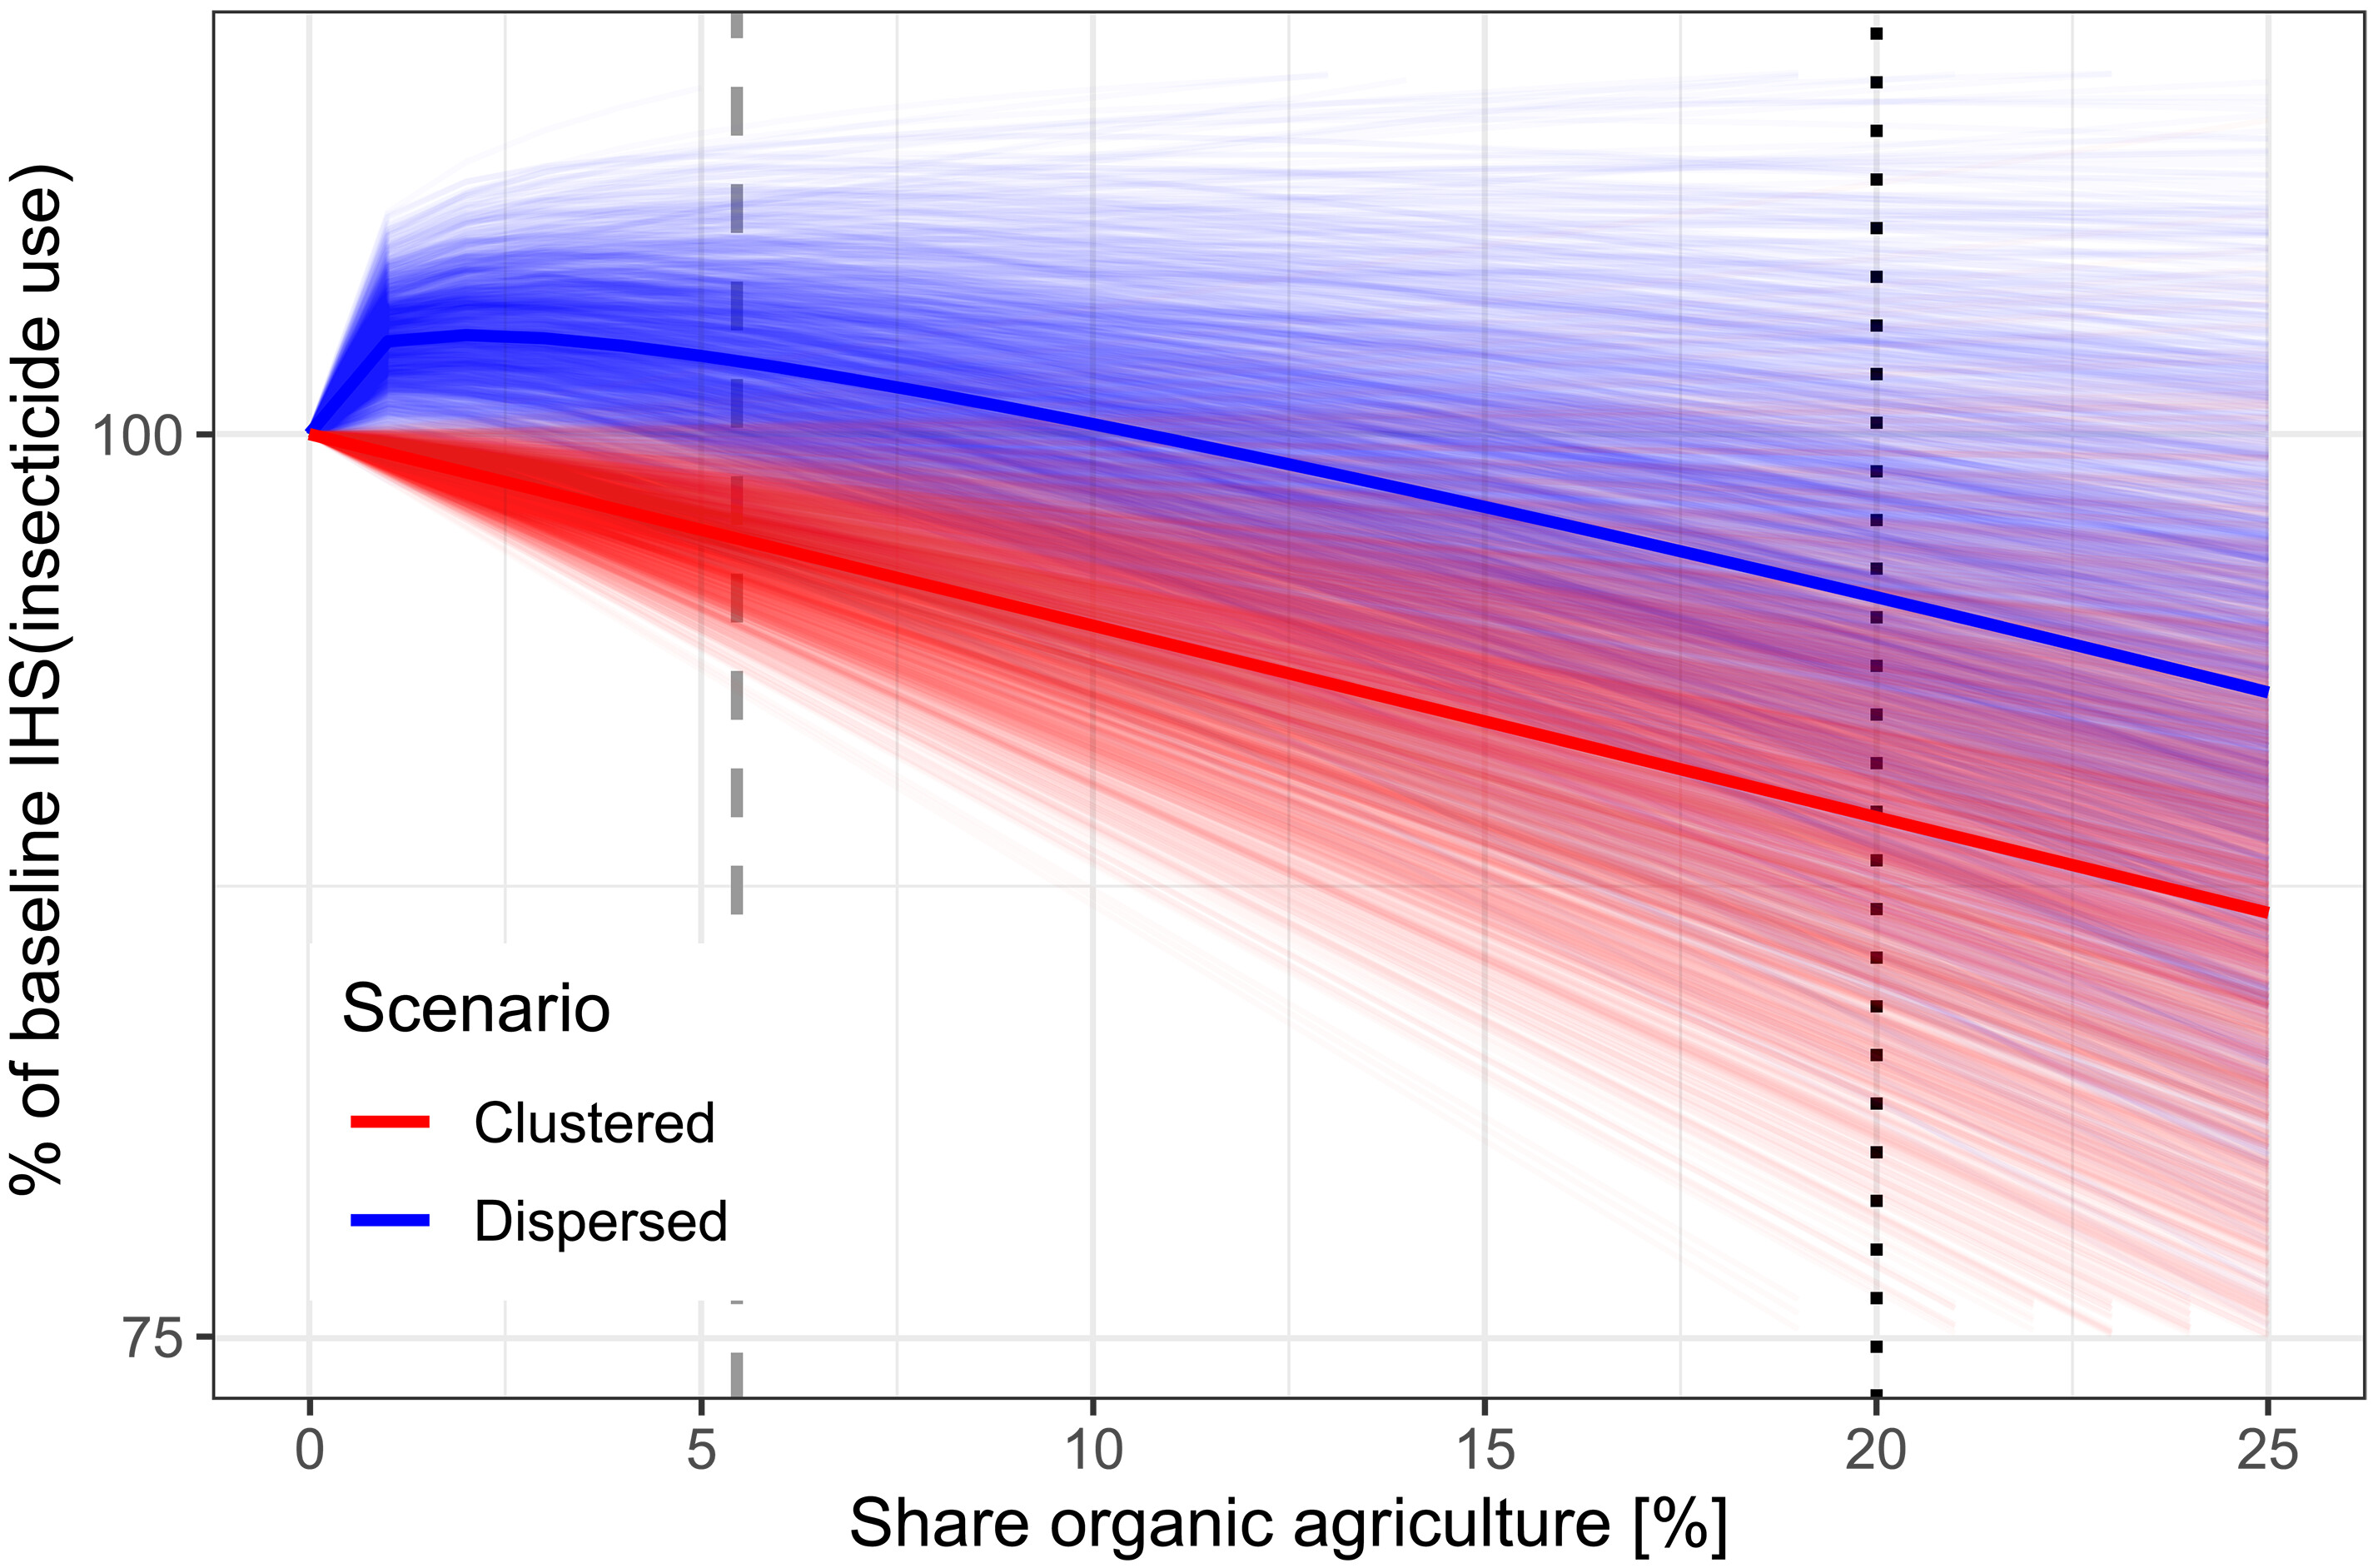 Kredit: ASHLEY E. LARSEN, et al.: Spillover effects of organic agriculture on pesticide use on nearby fields, SCIENCE, 2024 DOI: 10.1126/science.adf2572